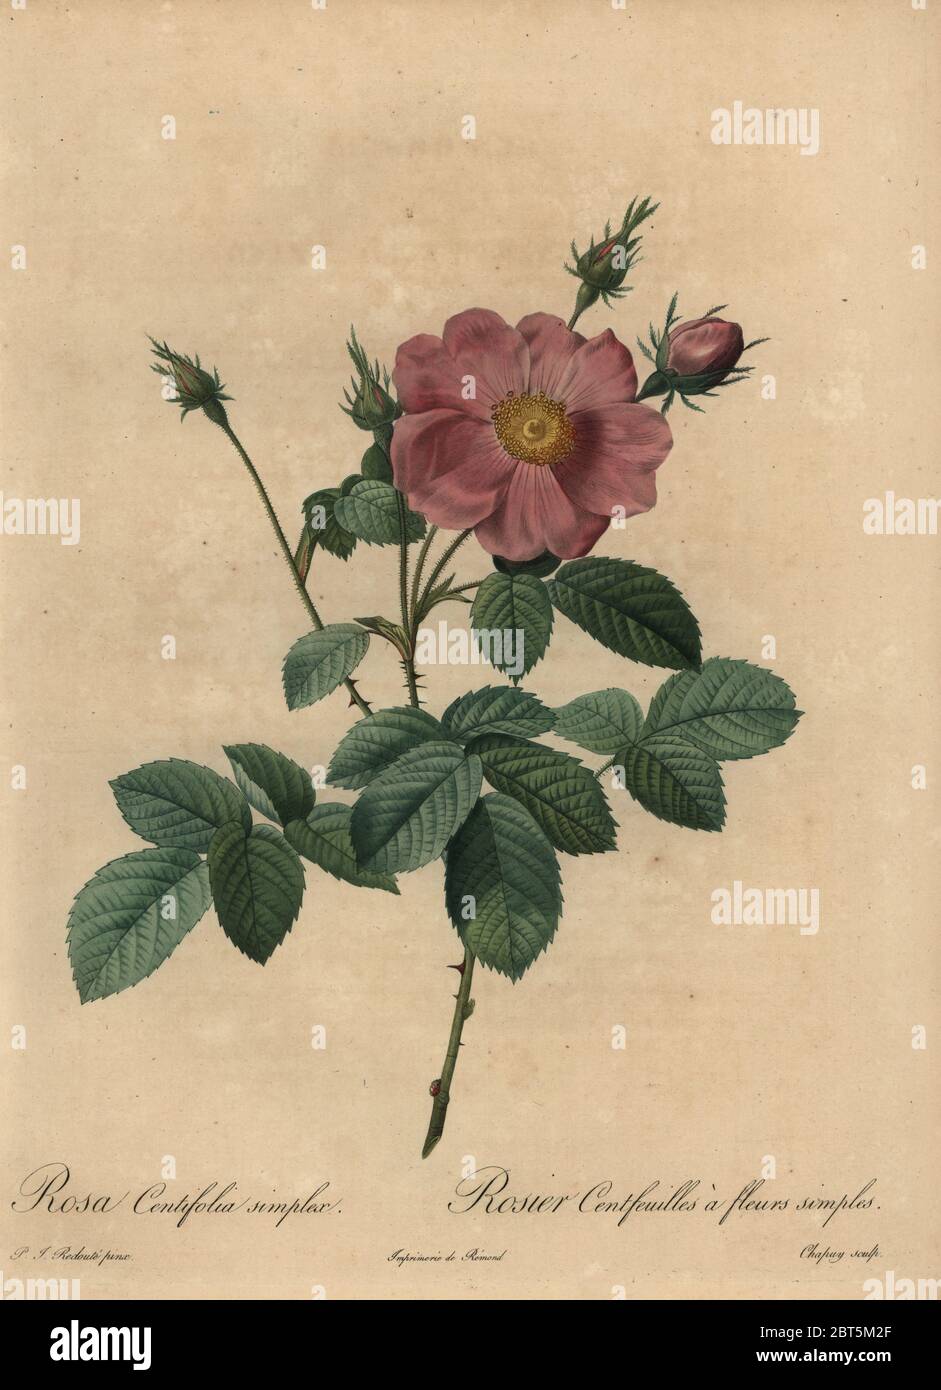 Pink rose, Rosa centifolia simplex. Rosier centfeuilles a fleurs simples. Stipple copperplate engraving by Jean Baptiste Chapuy handcoloured a la poupee after a botanical illustration by Pierre-Joseph Redoute from the first folio edition of Les Roses, Firmin Didot, Paris, 1817. Stock Photo